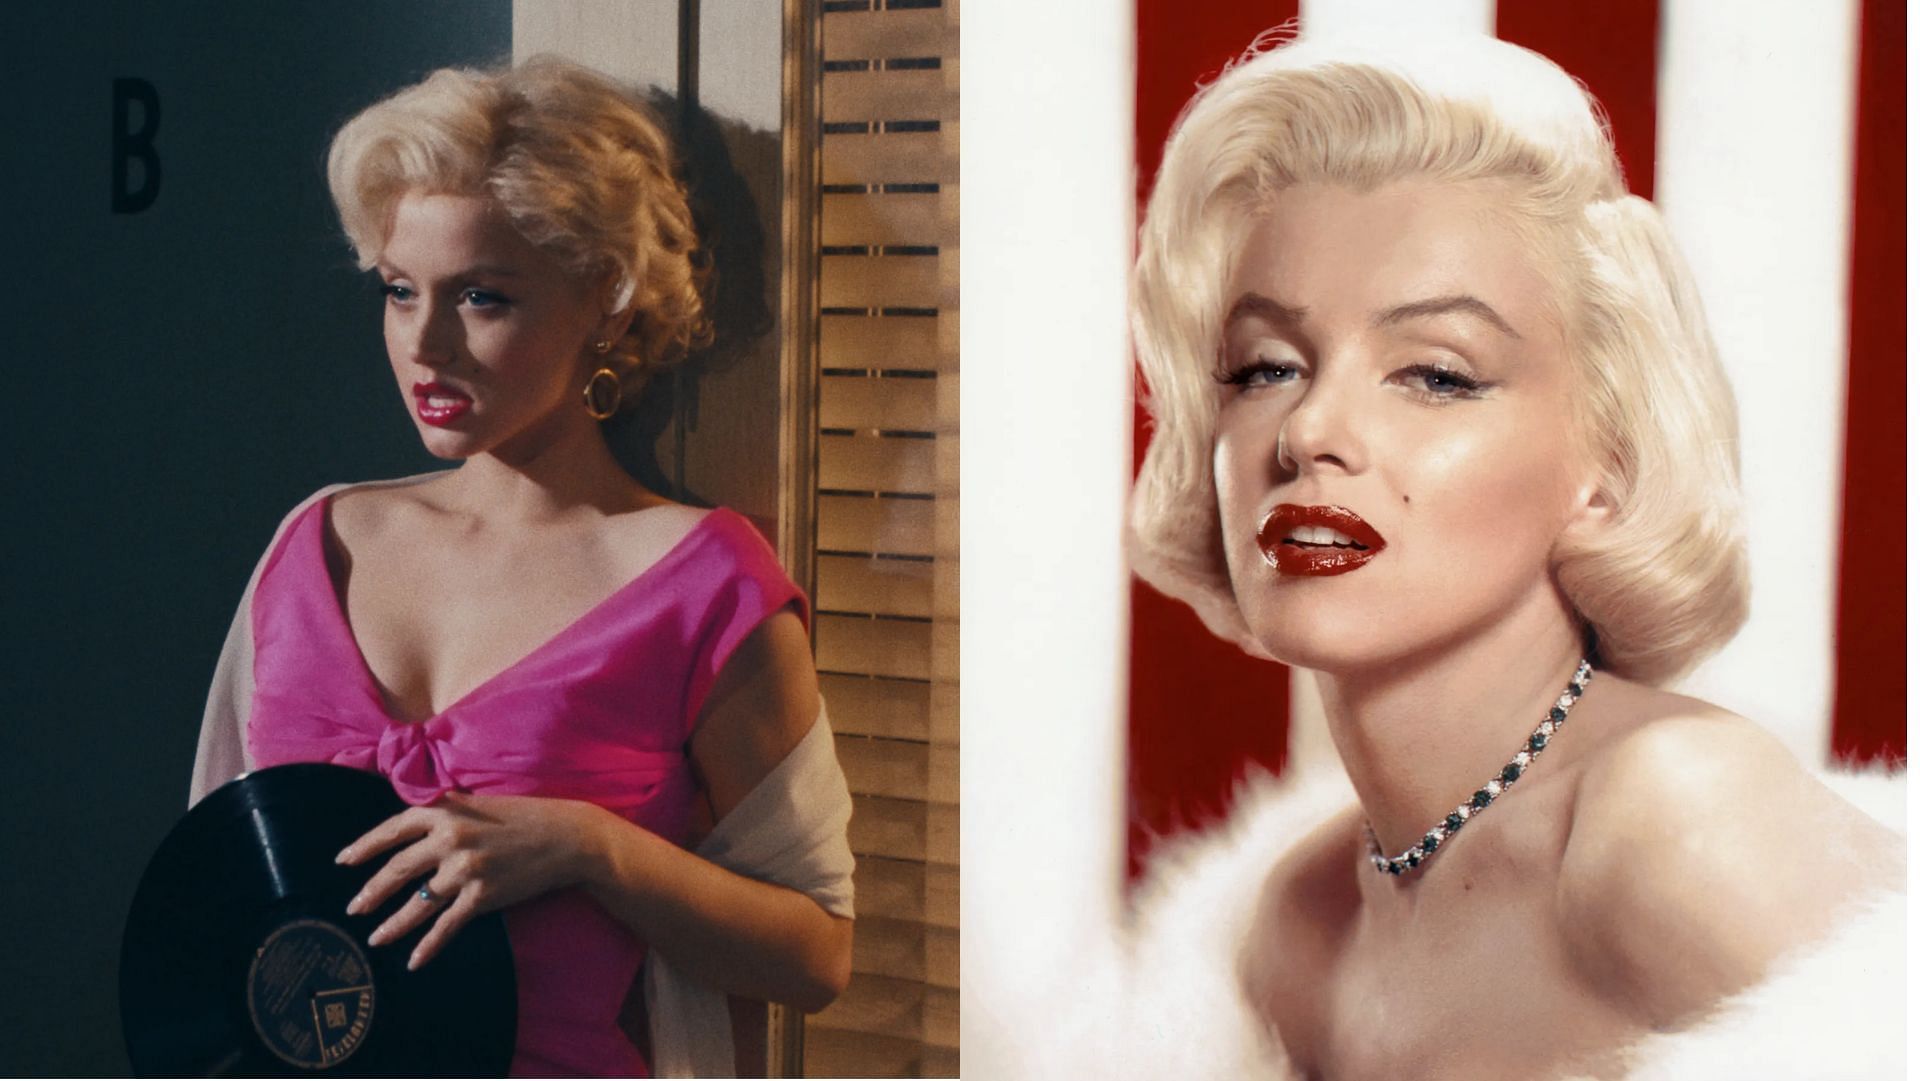 Blonde' Marilyn Monroe Film With Ana de Armas: Cast, Release Date, Trailer,  and News